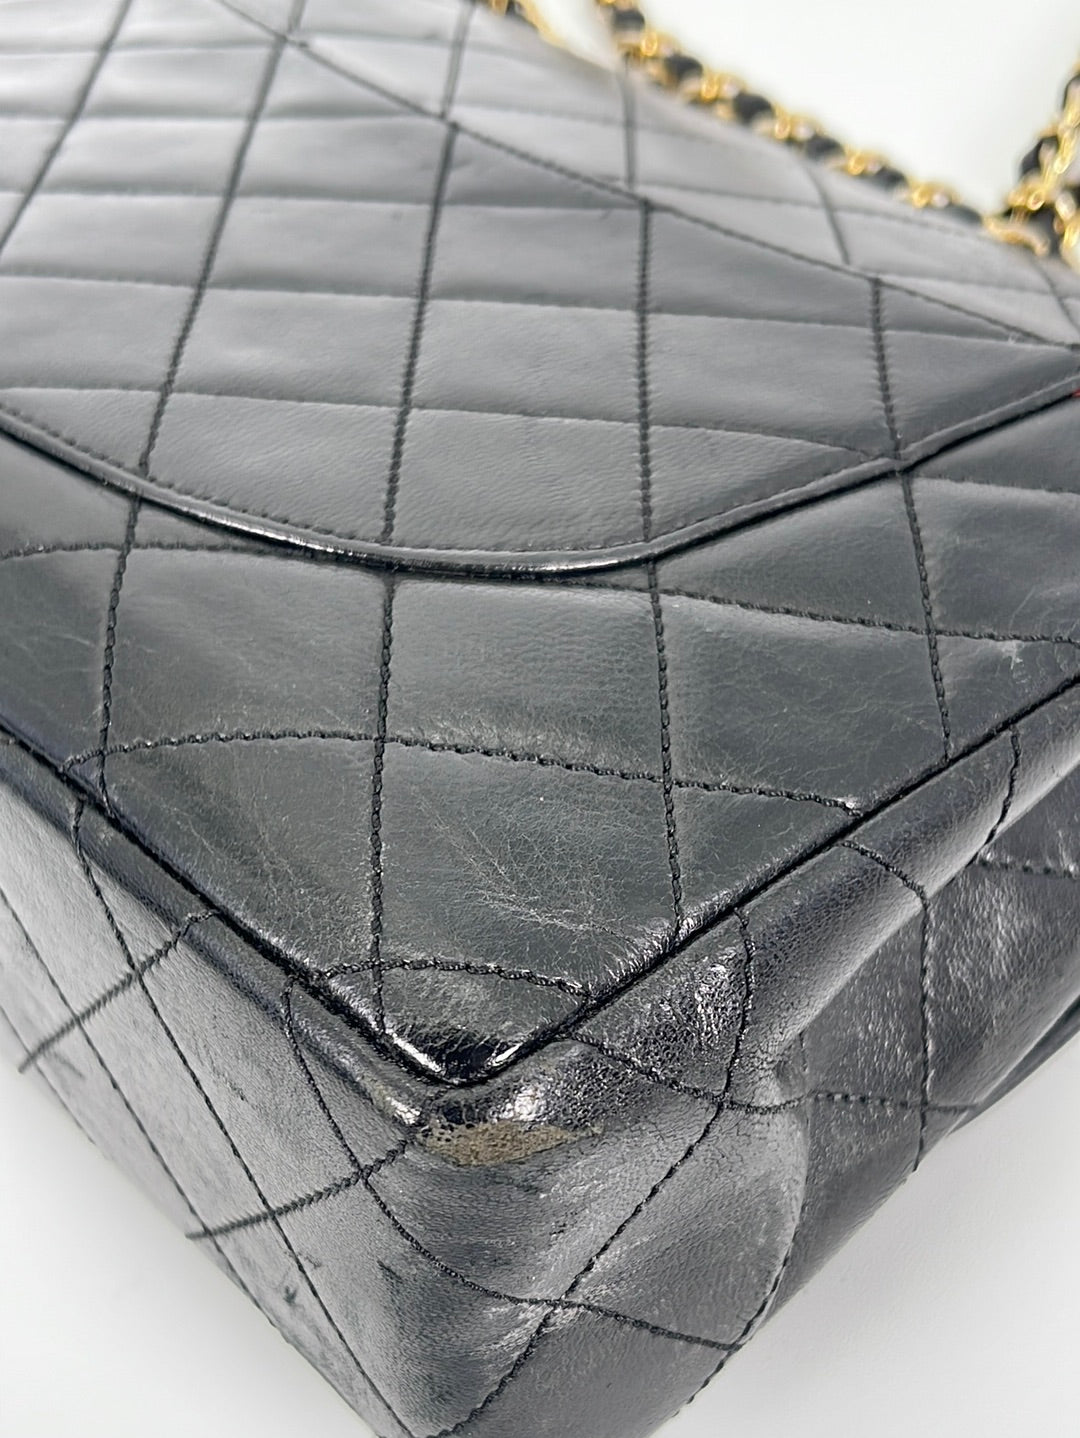 Preloved Chanel Black Quilted Lambskin O Case Clutch Bag 22969991 0413 –  KimmieBBags LLC